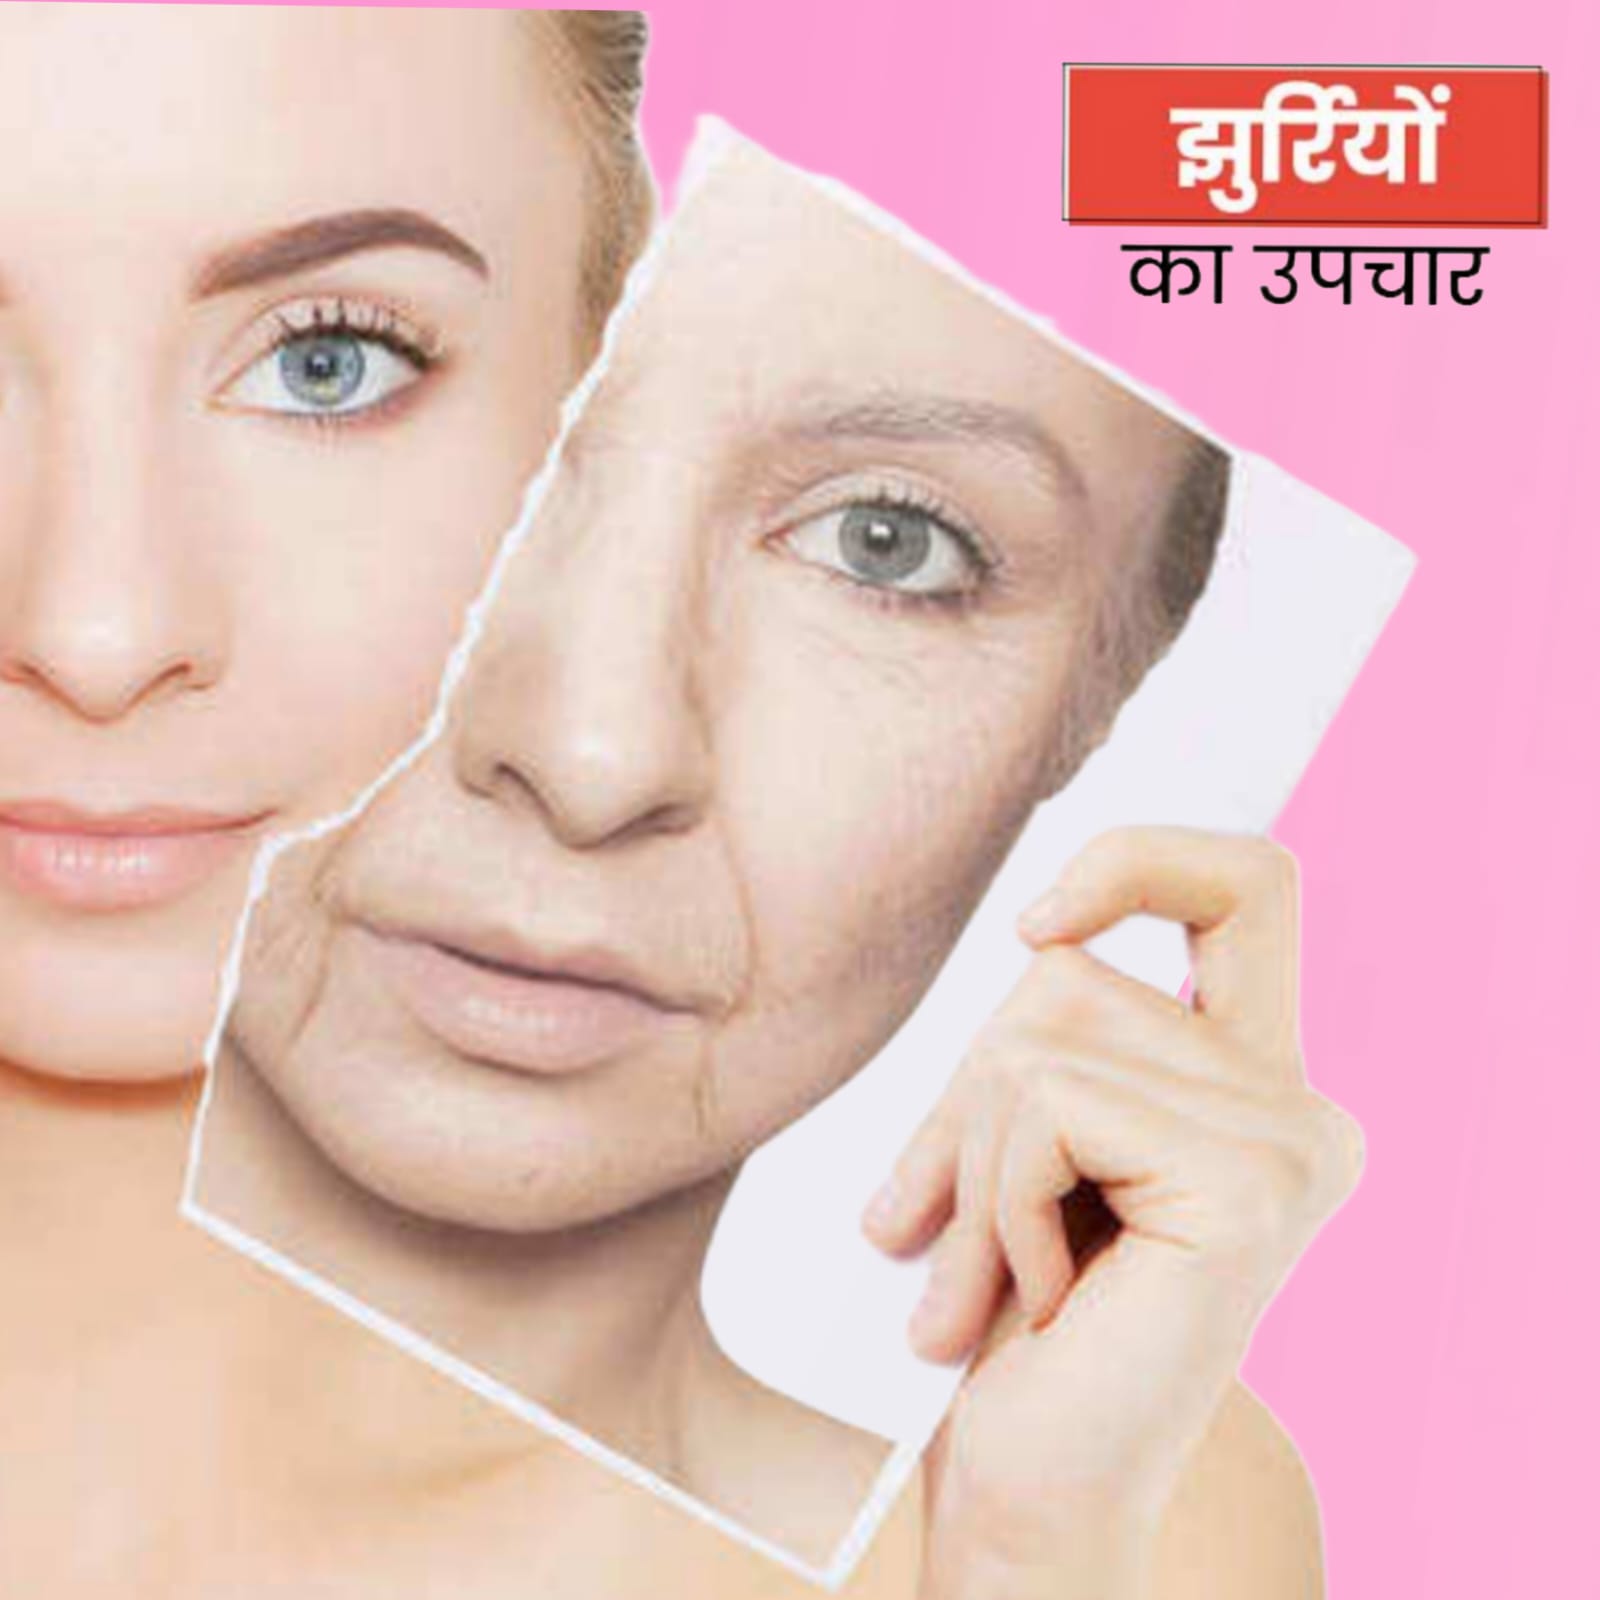 Beauty Tips: If you are looking old before your age then do these 5 things